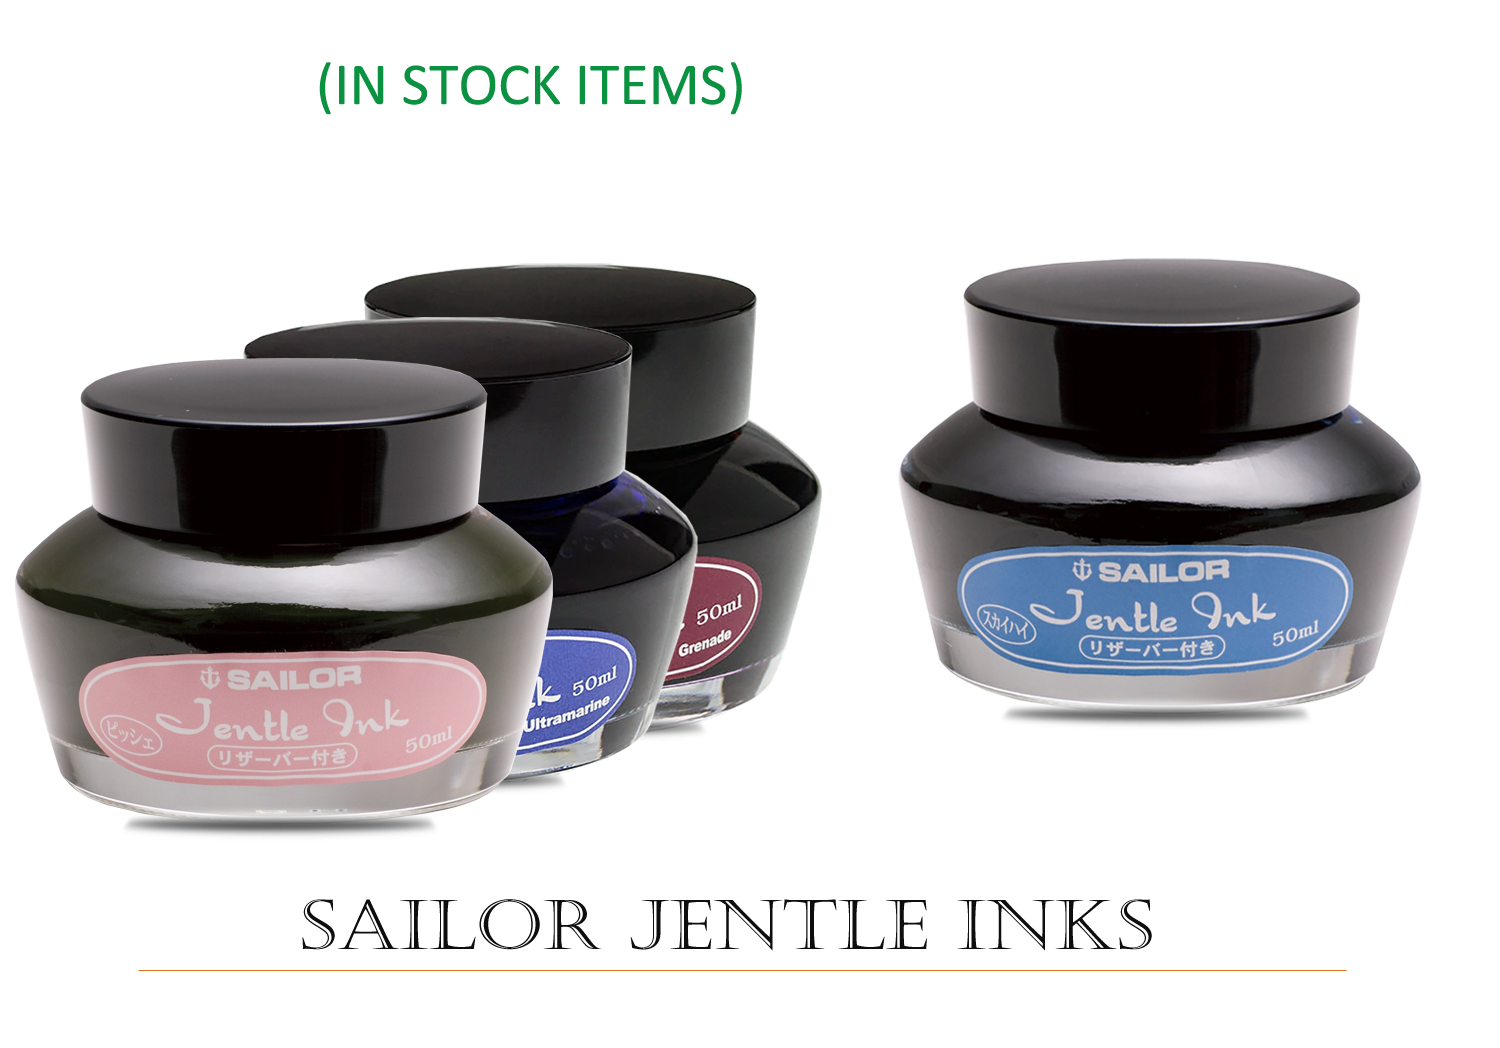 Sailor discontinuation of the Jentle Inks.